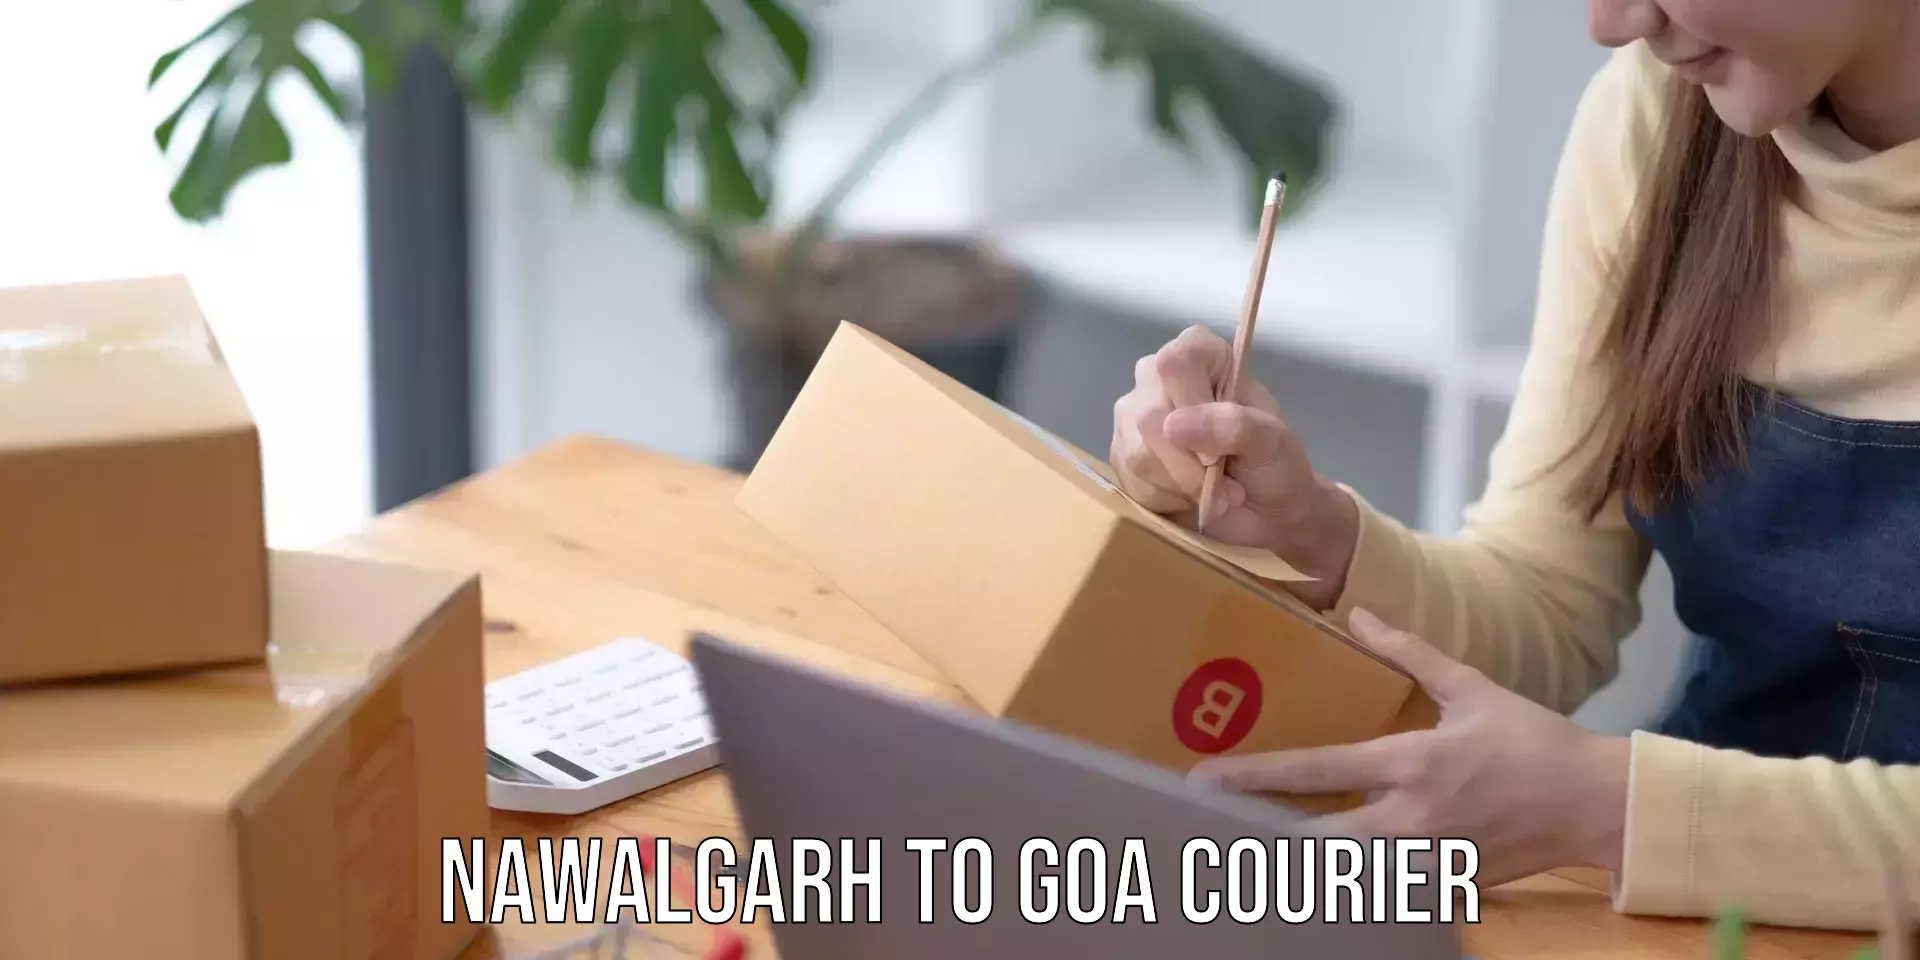 Reliable delivery network Nawalgarh to Goa